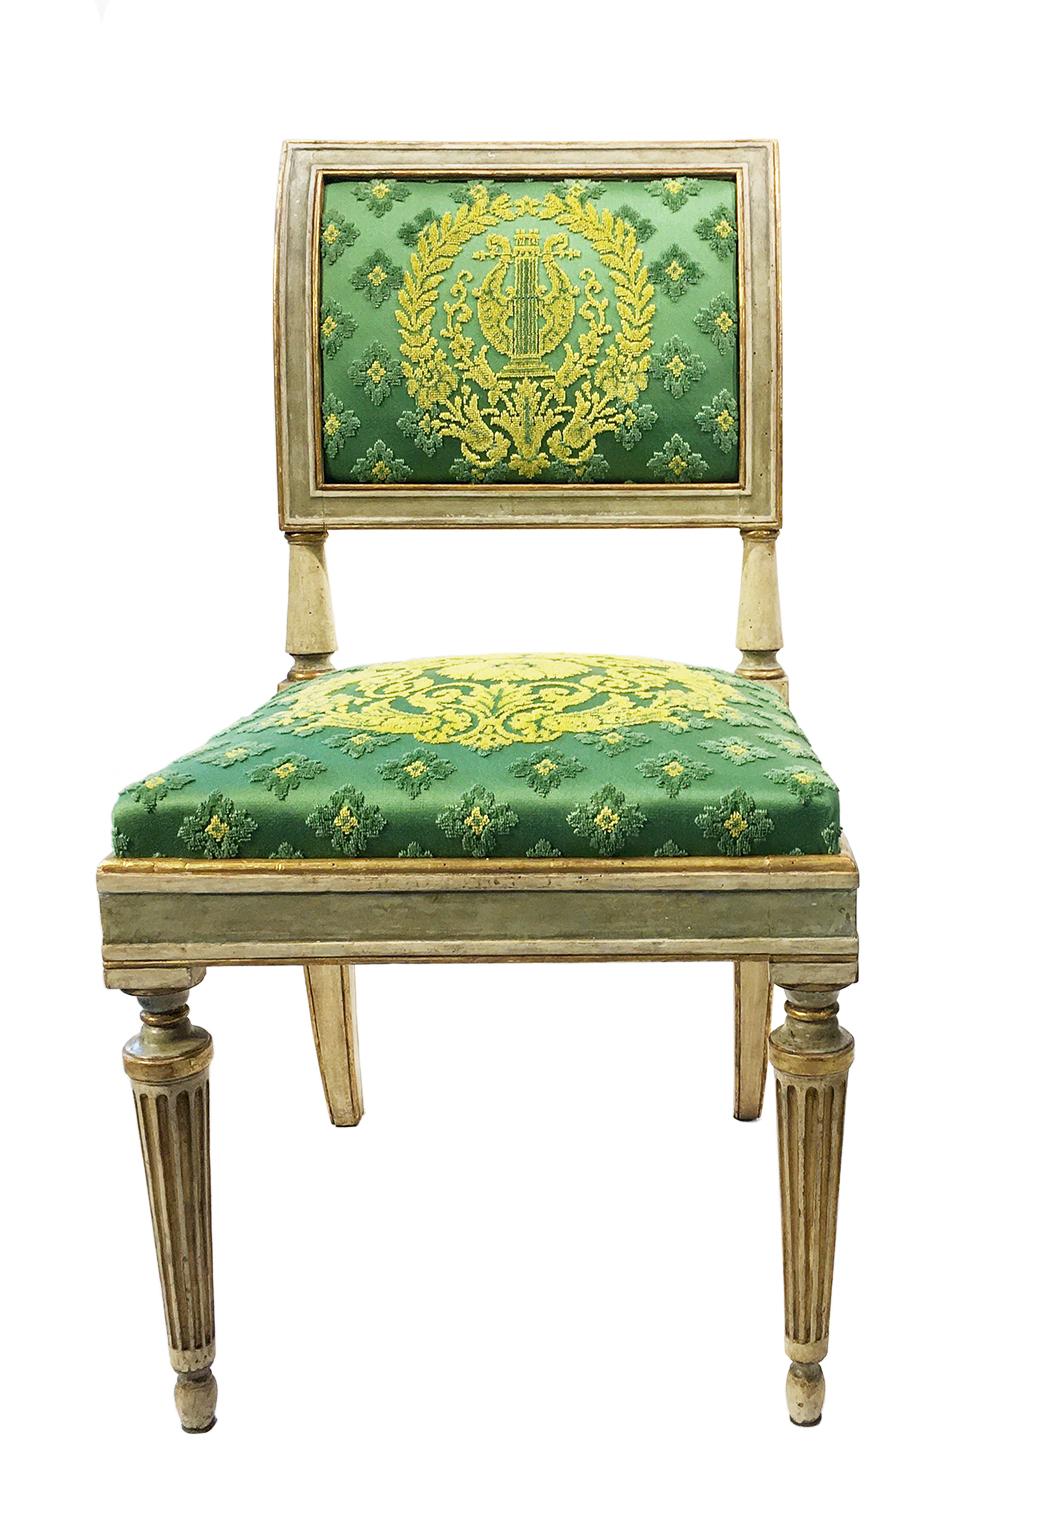 Group of seven chairs
Milan, first quarter of the 19th century
Carved walnut wood, lacquered in gray green and cream and partially gilded
They measure:
height 36.61 in (18.11 in to the seat) x 19.29 in x 19.68 
(height 93 cm – 46 cm to the seat